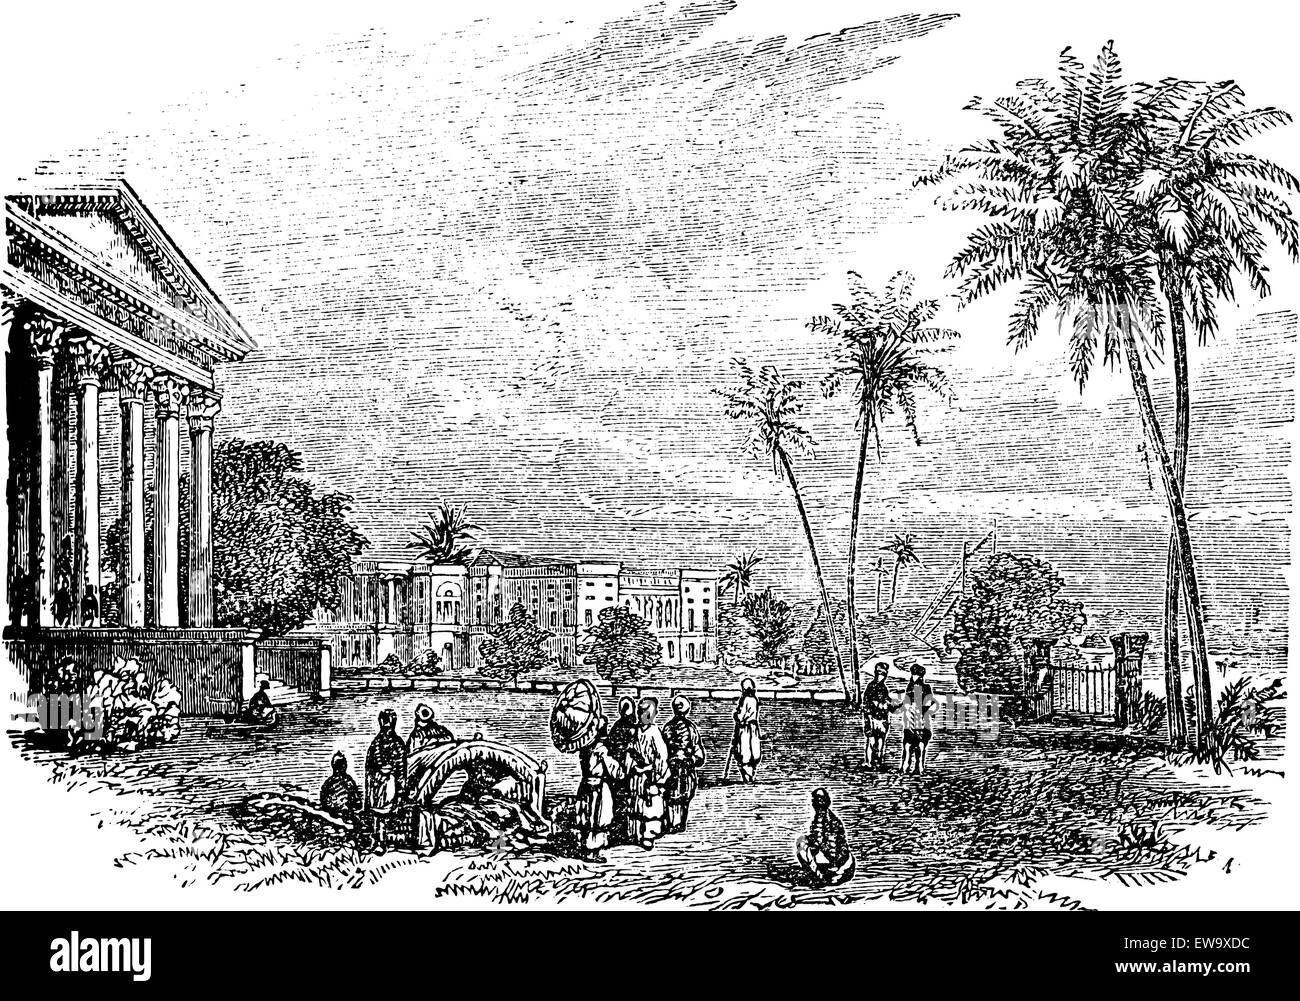 Barrackpore or Barrackpur, in West Bengal, India, during the 1890s, vintage engraving. Old engraved illustration of Barrackpore. Stock Vector